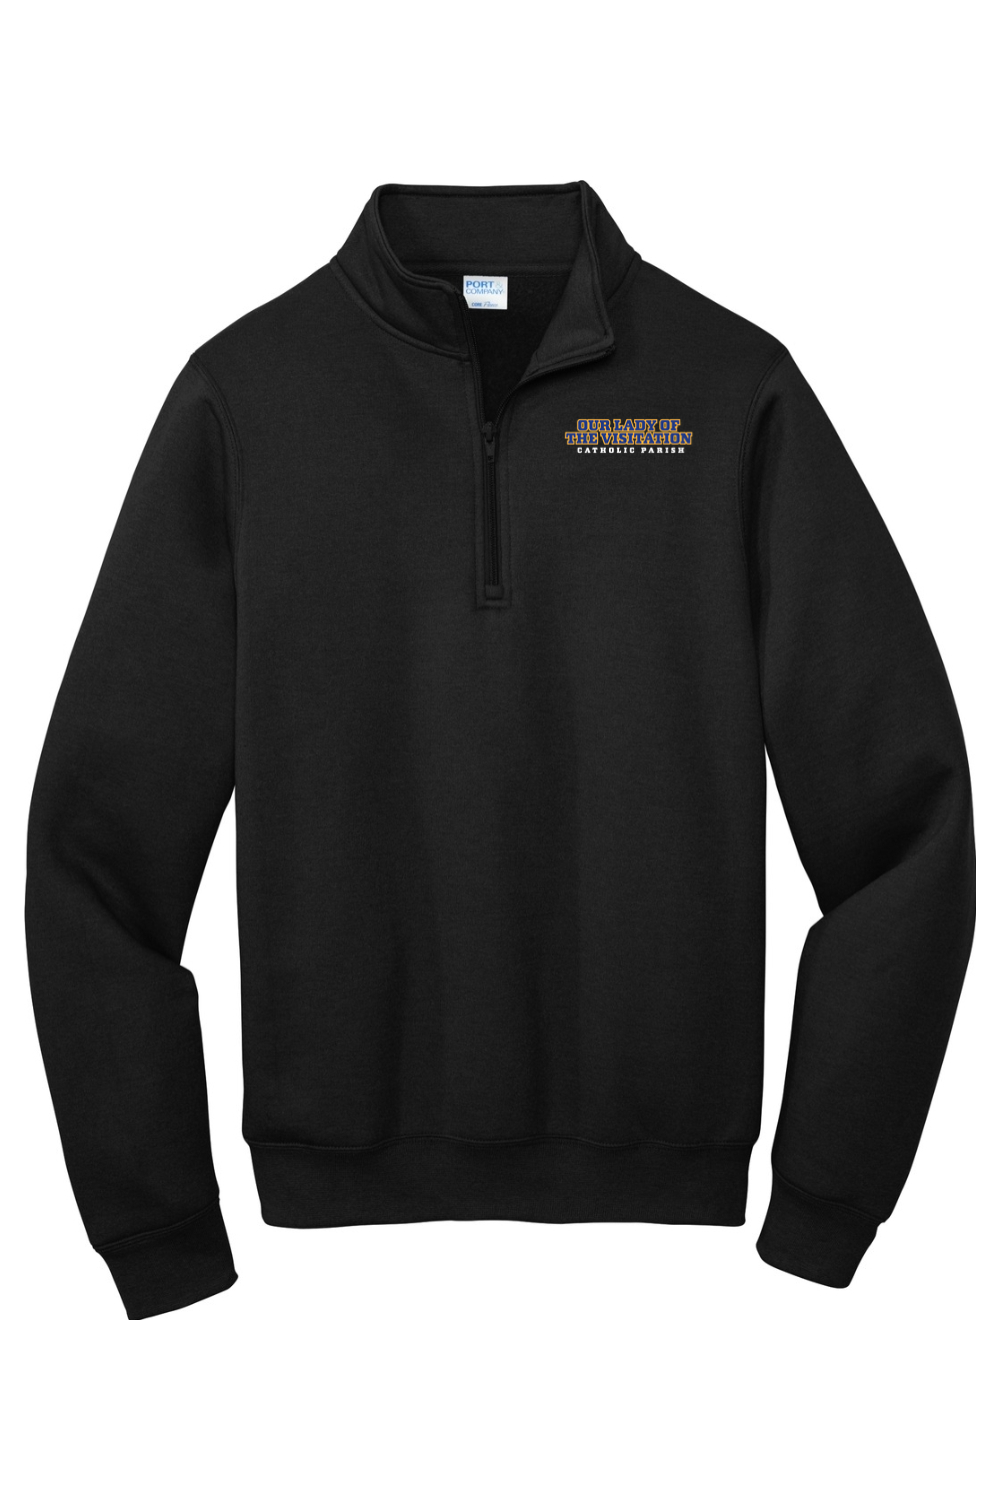 Our Lady of the Visitation Stacked Left Chest Quarter Zip